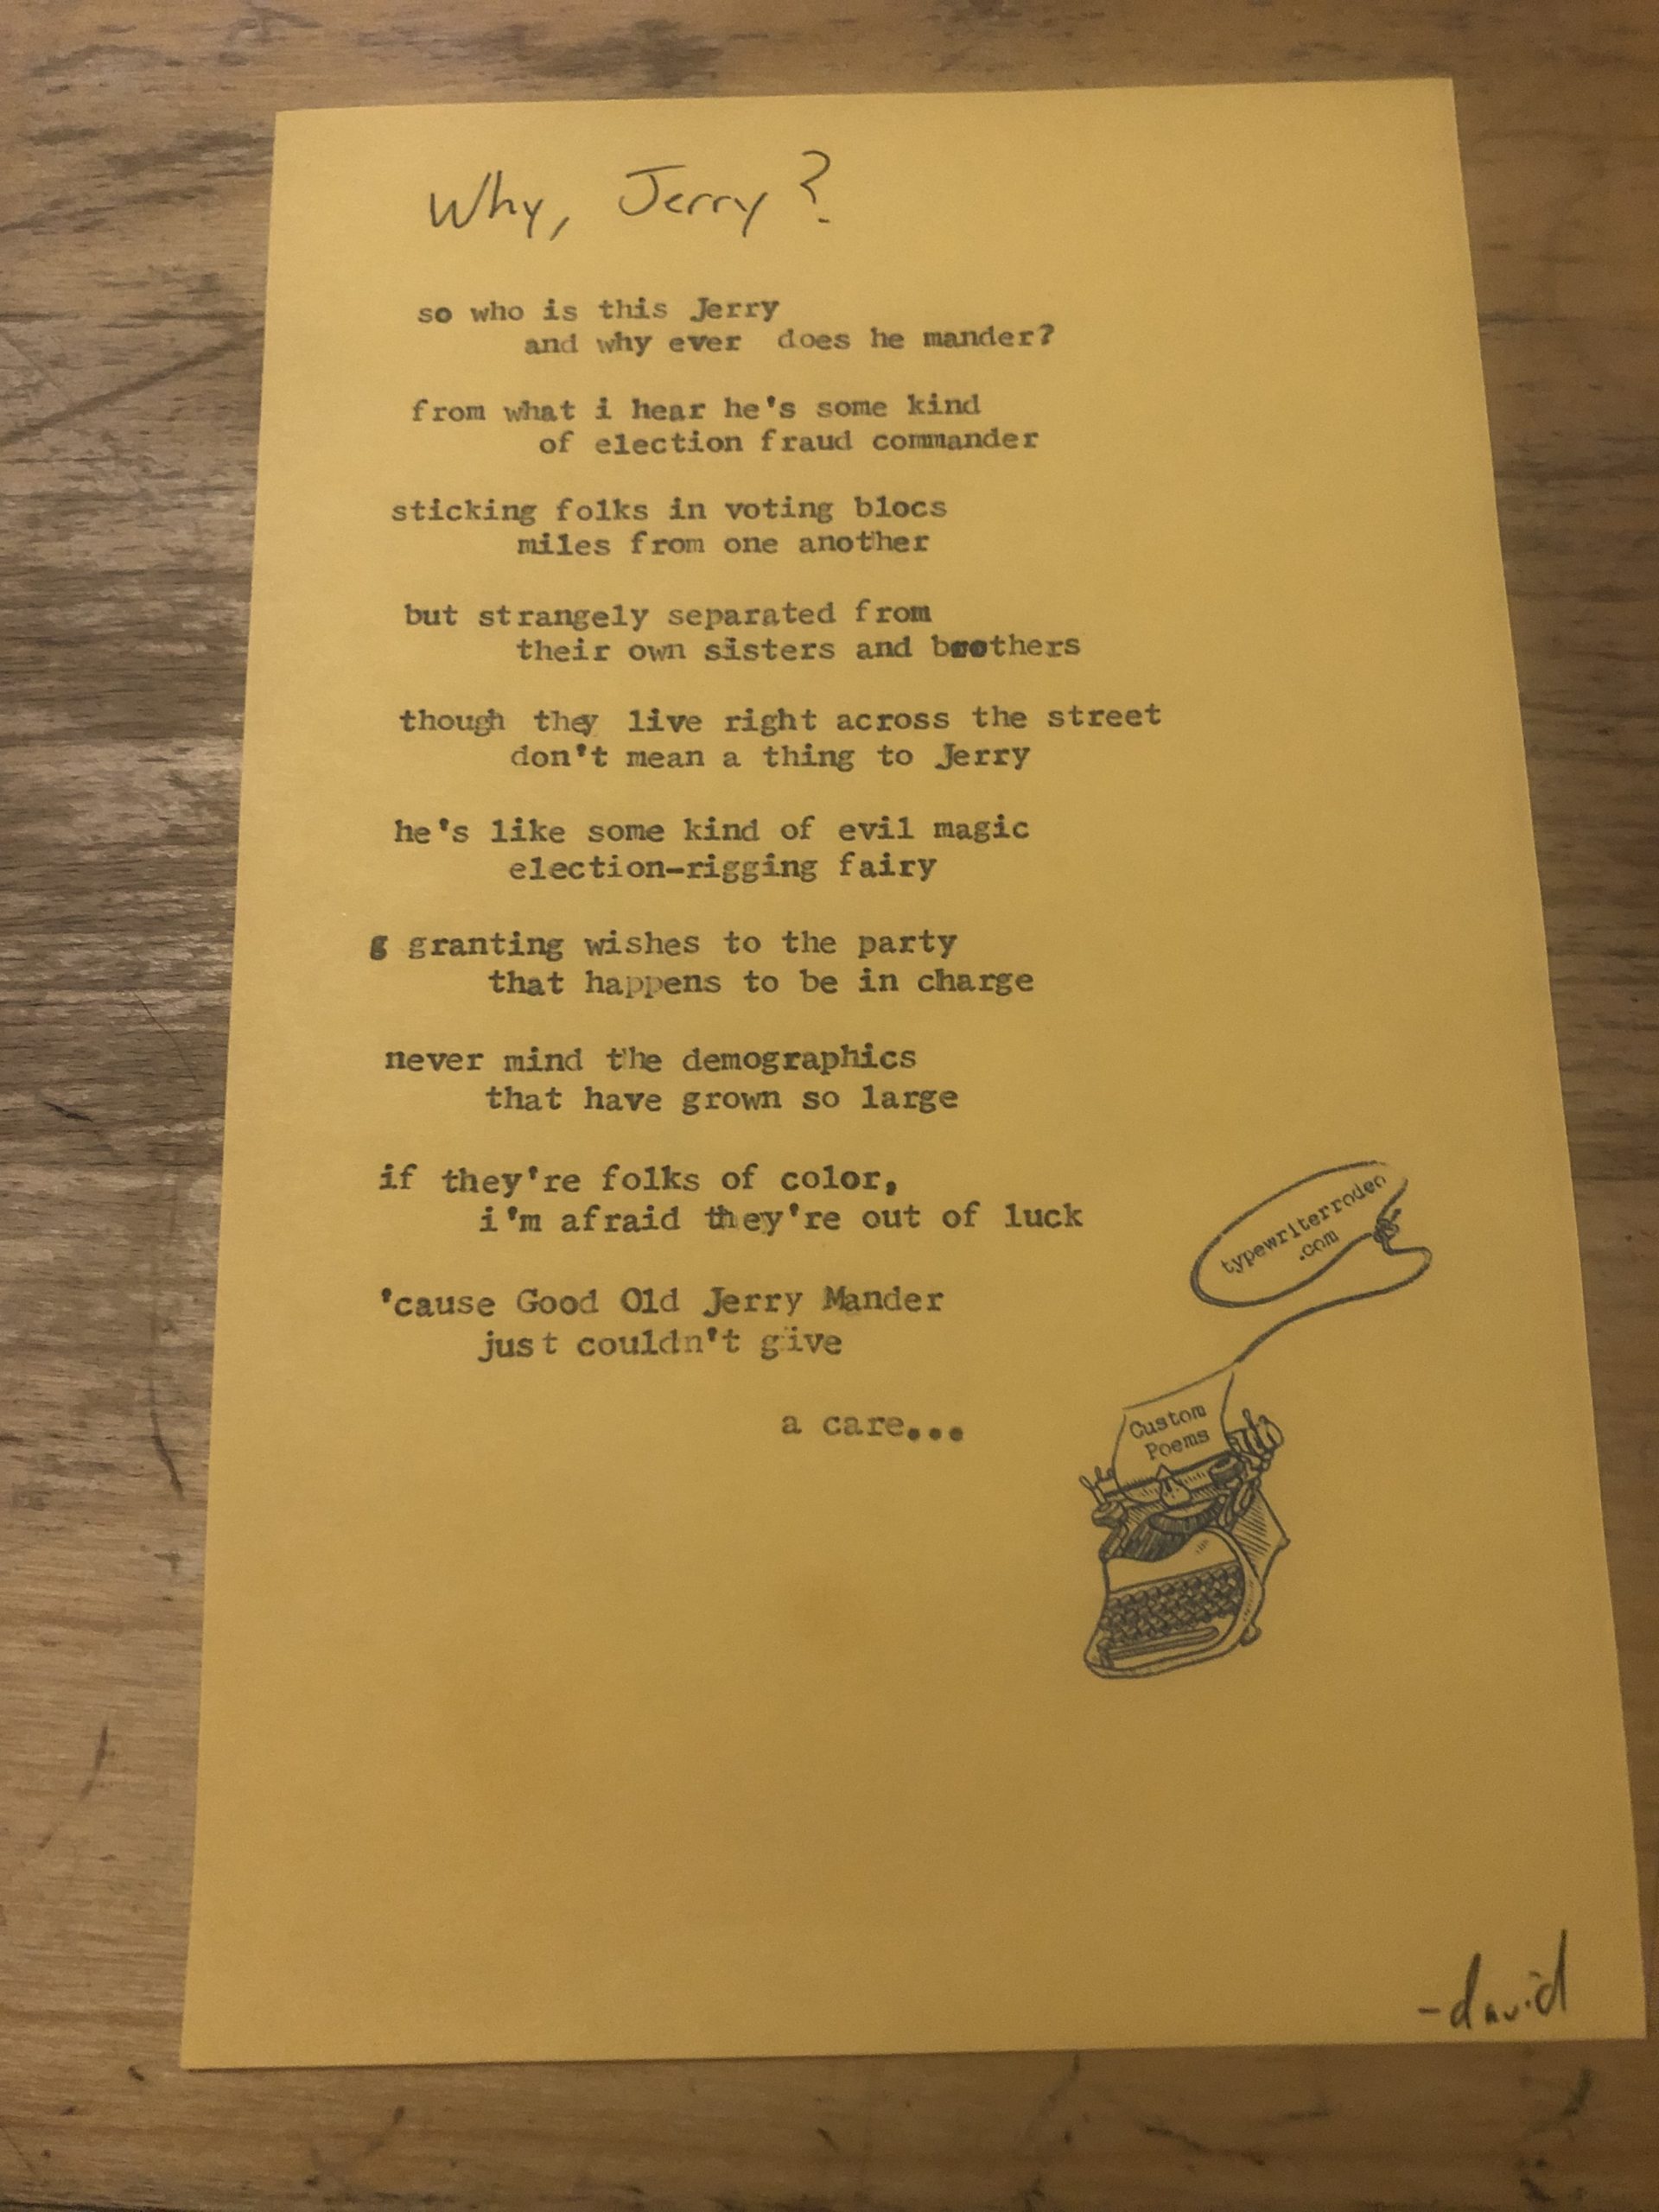 a photo of the typewritten poem on a yellow, torn piece of paper